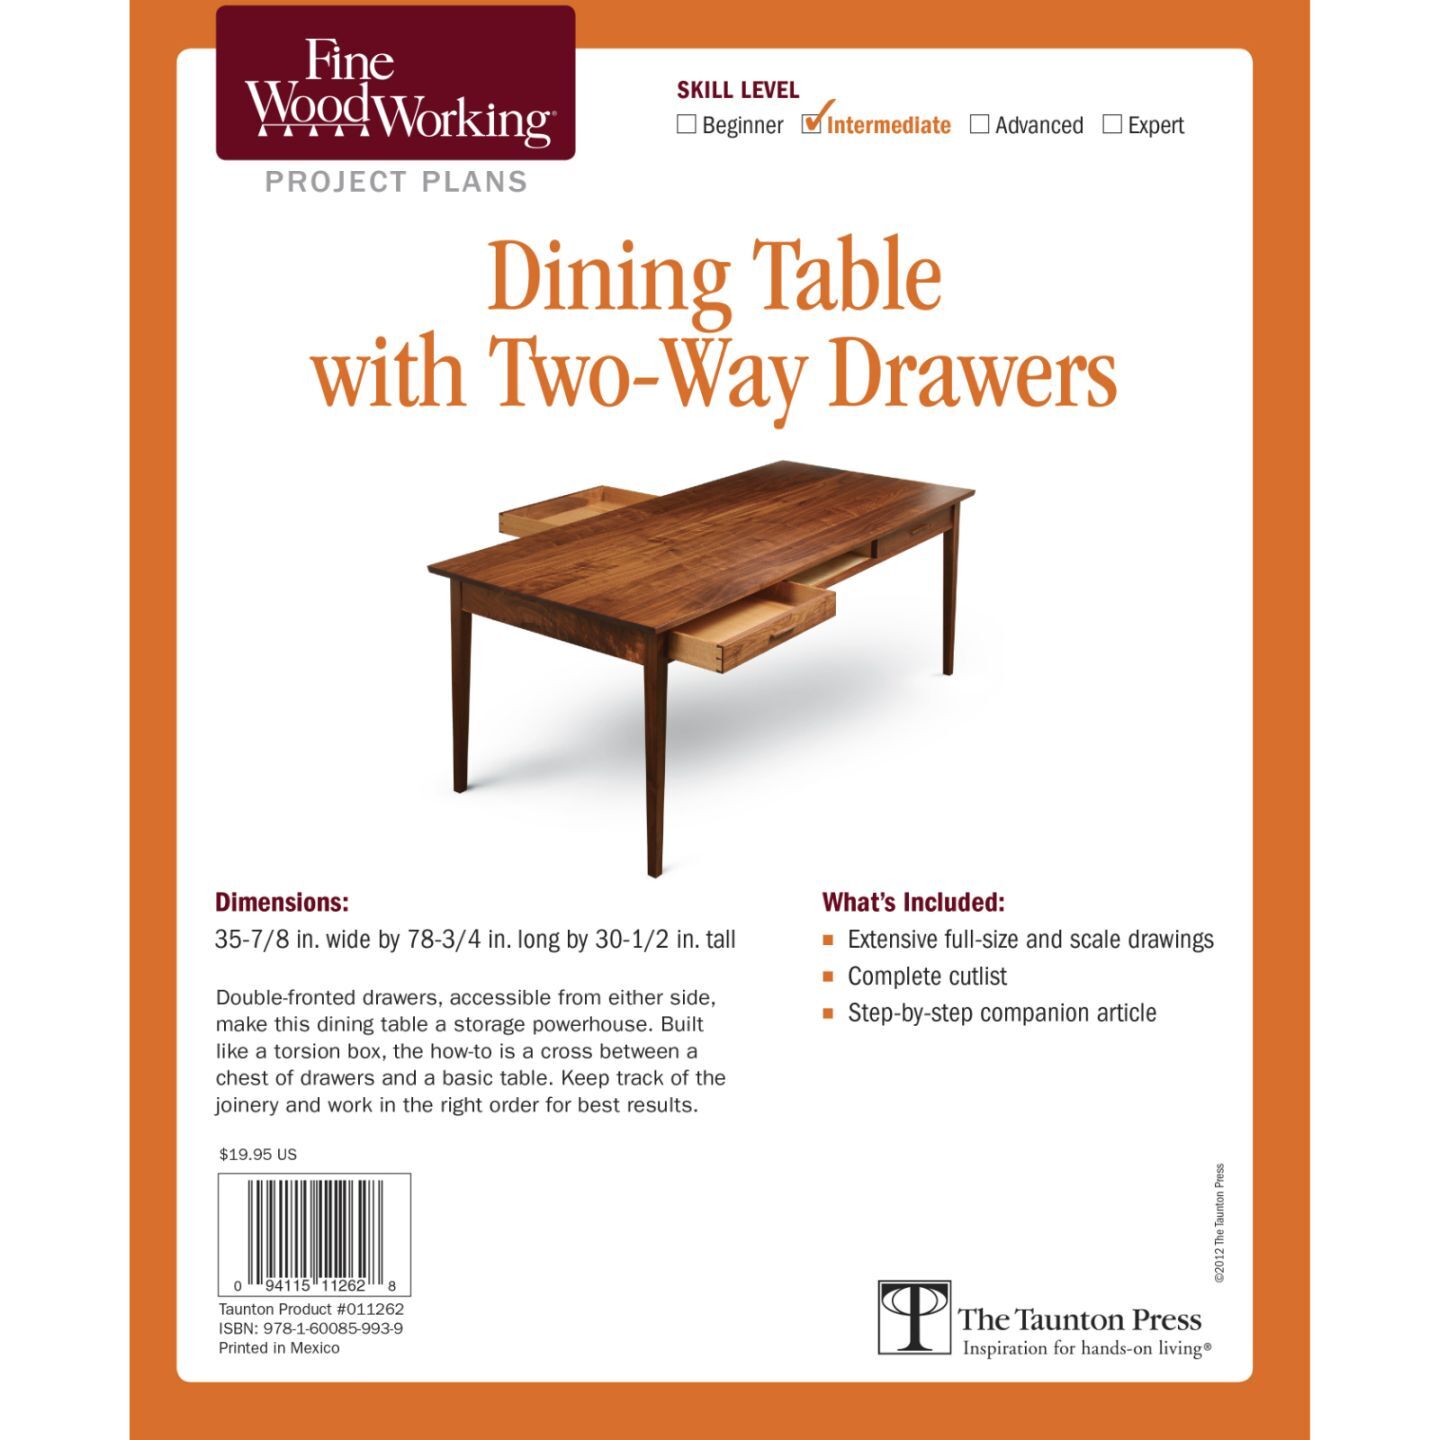 Dining Table with TwoWay Drawers Plan Taunton Press